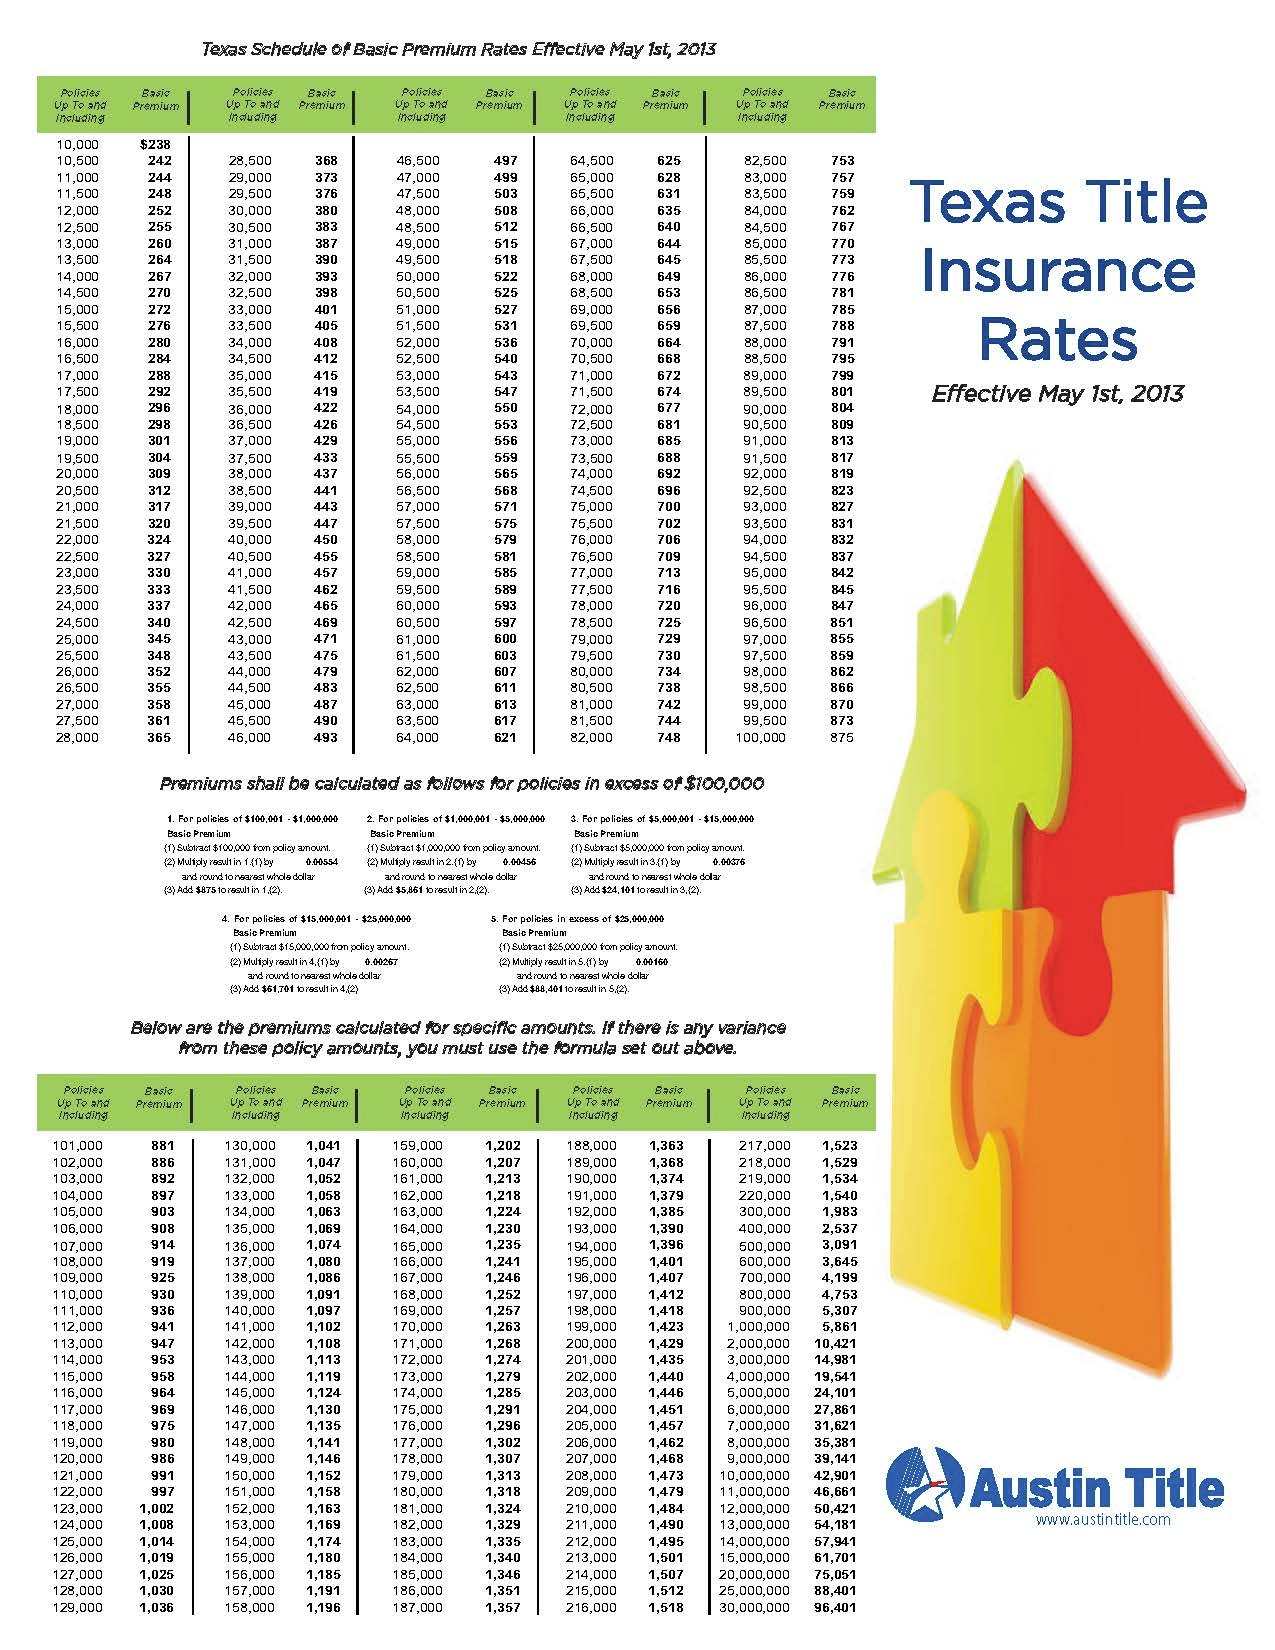 Texas Title Insurance Rates SR Group